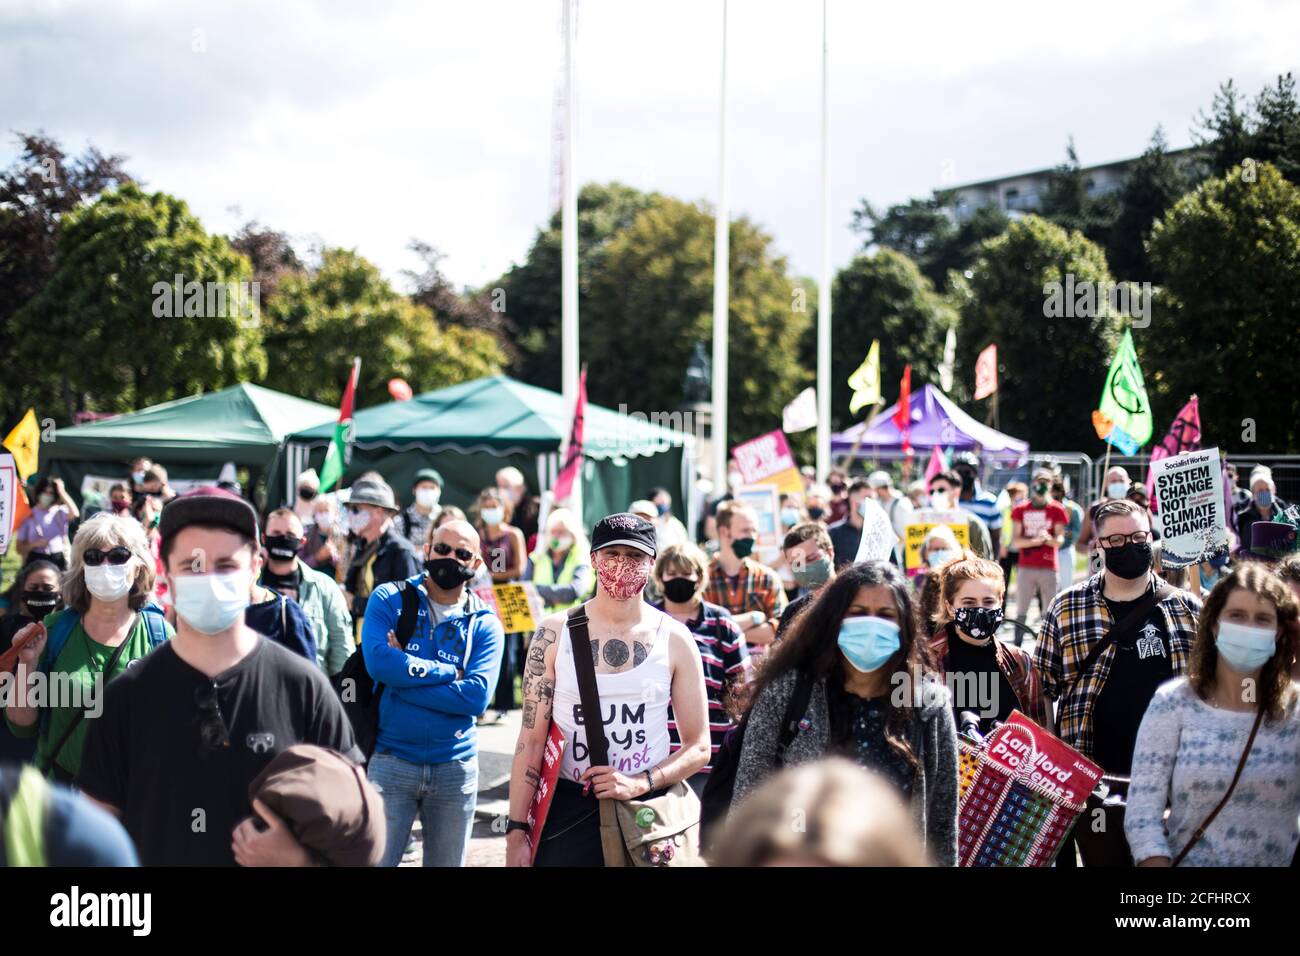 United Kingdom: Cardiff, Wales. Protesters gather and rally for justice and a change in government system at a BLM rally. Stock Photo